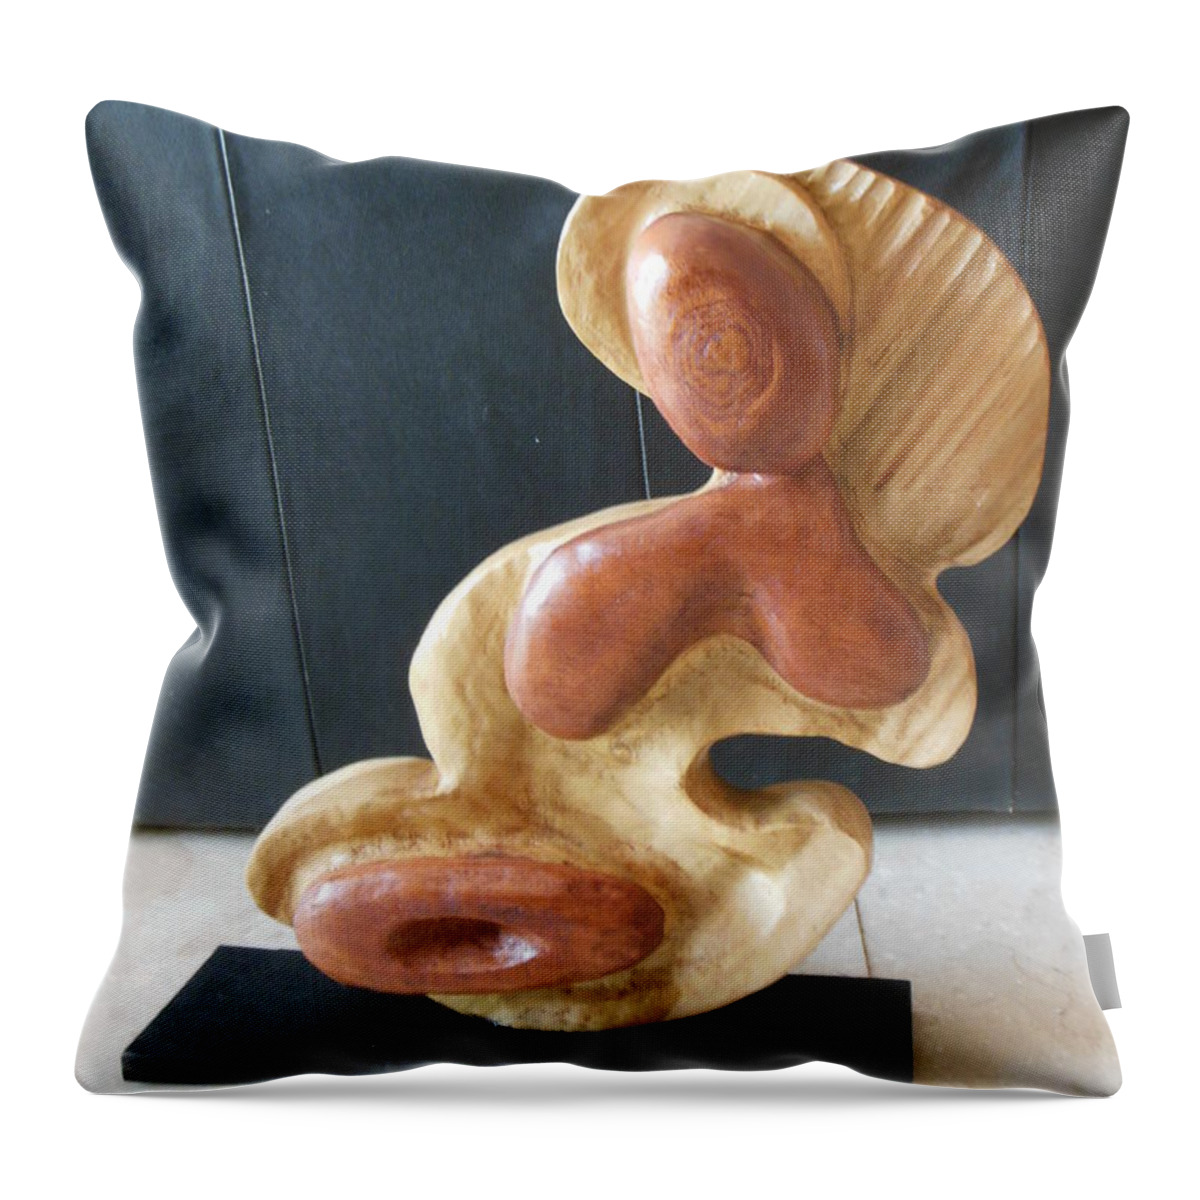 I Am Woman Front View Throw Pillow featuring the painting I Am Woman Front View by Esther Newman-Cohen